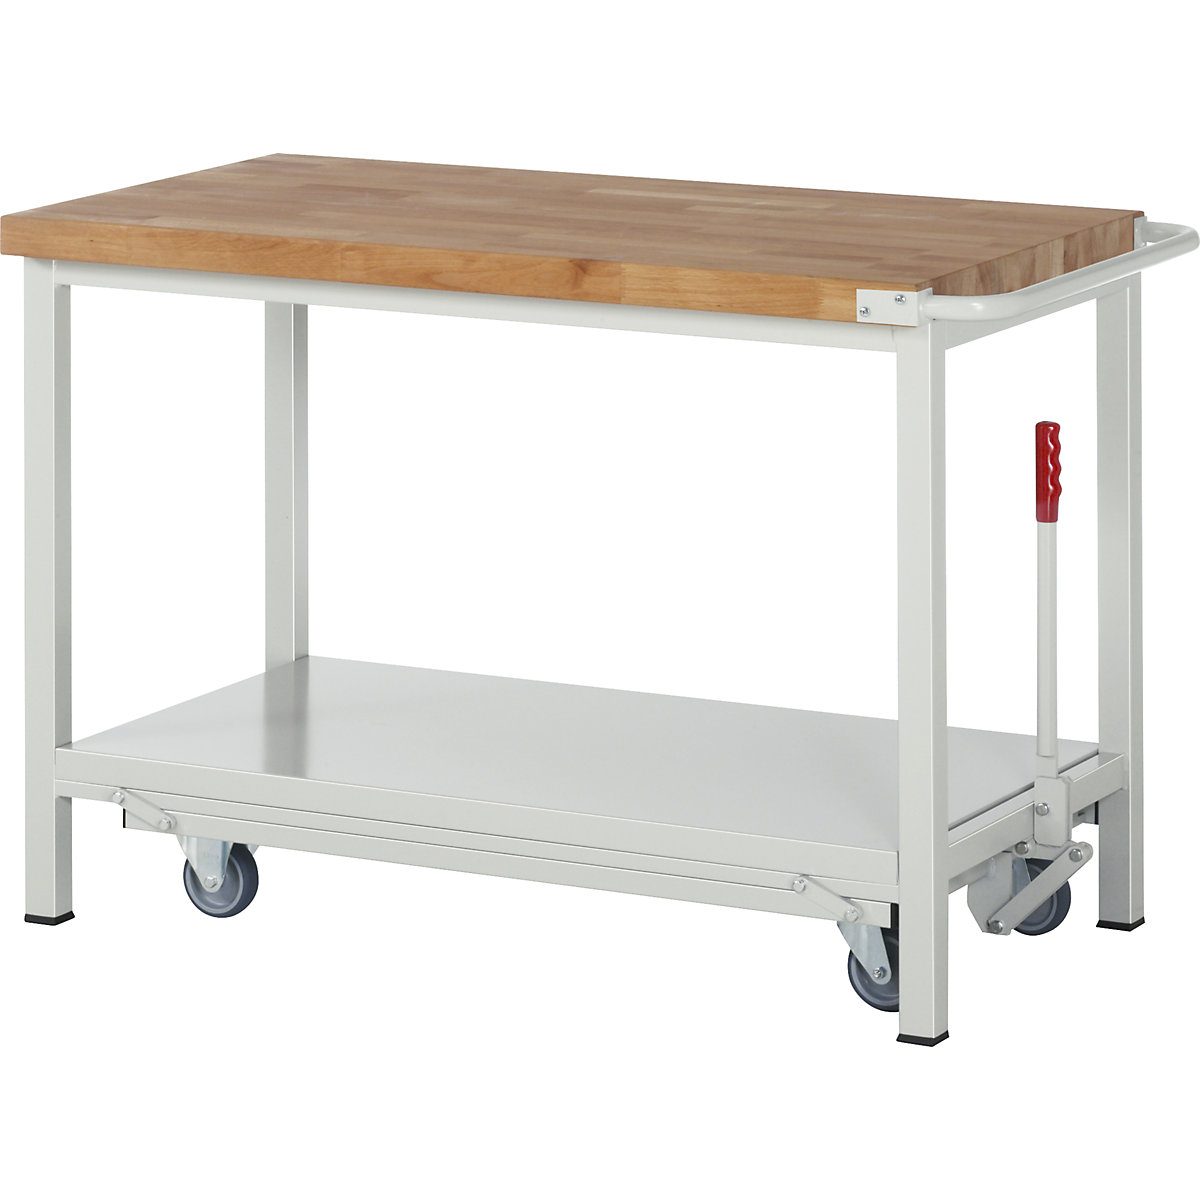 Mobile and lowerable workbench, Series 8 frame construction – eurokraft pro, 1 shelf, WxD 1250 x 700 mm-4